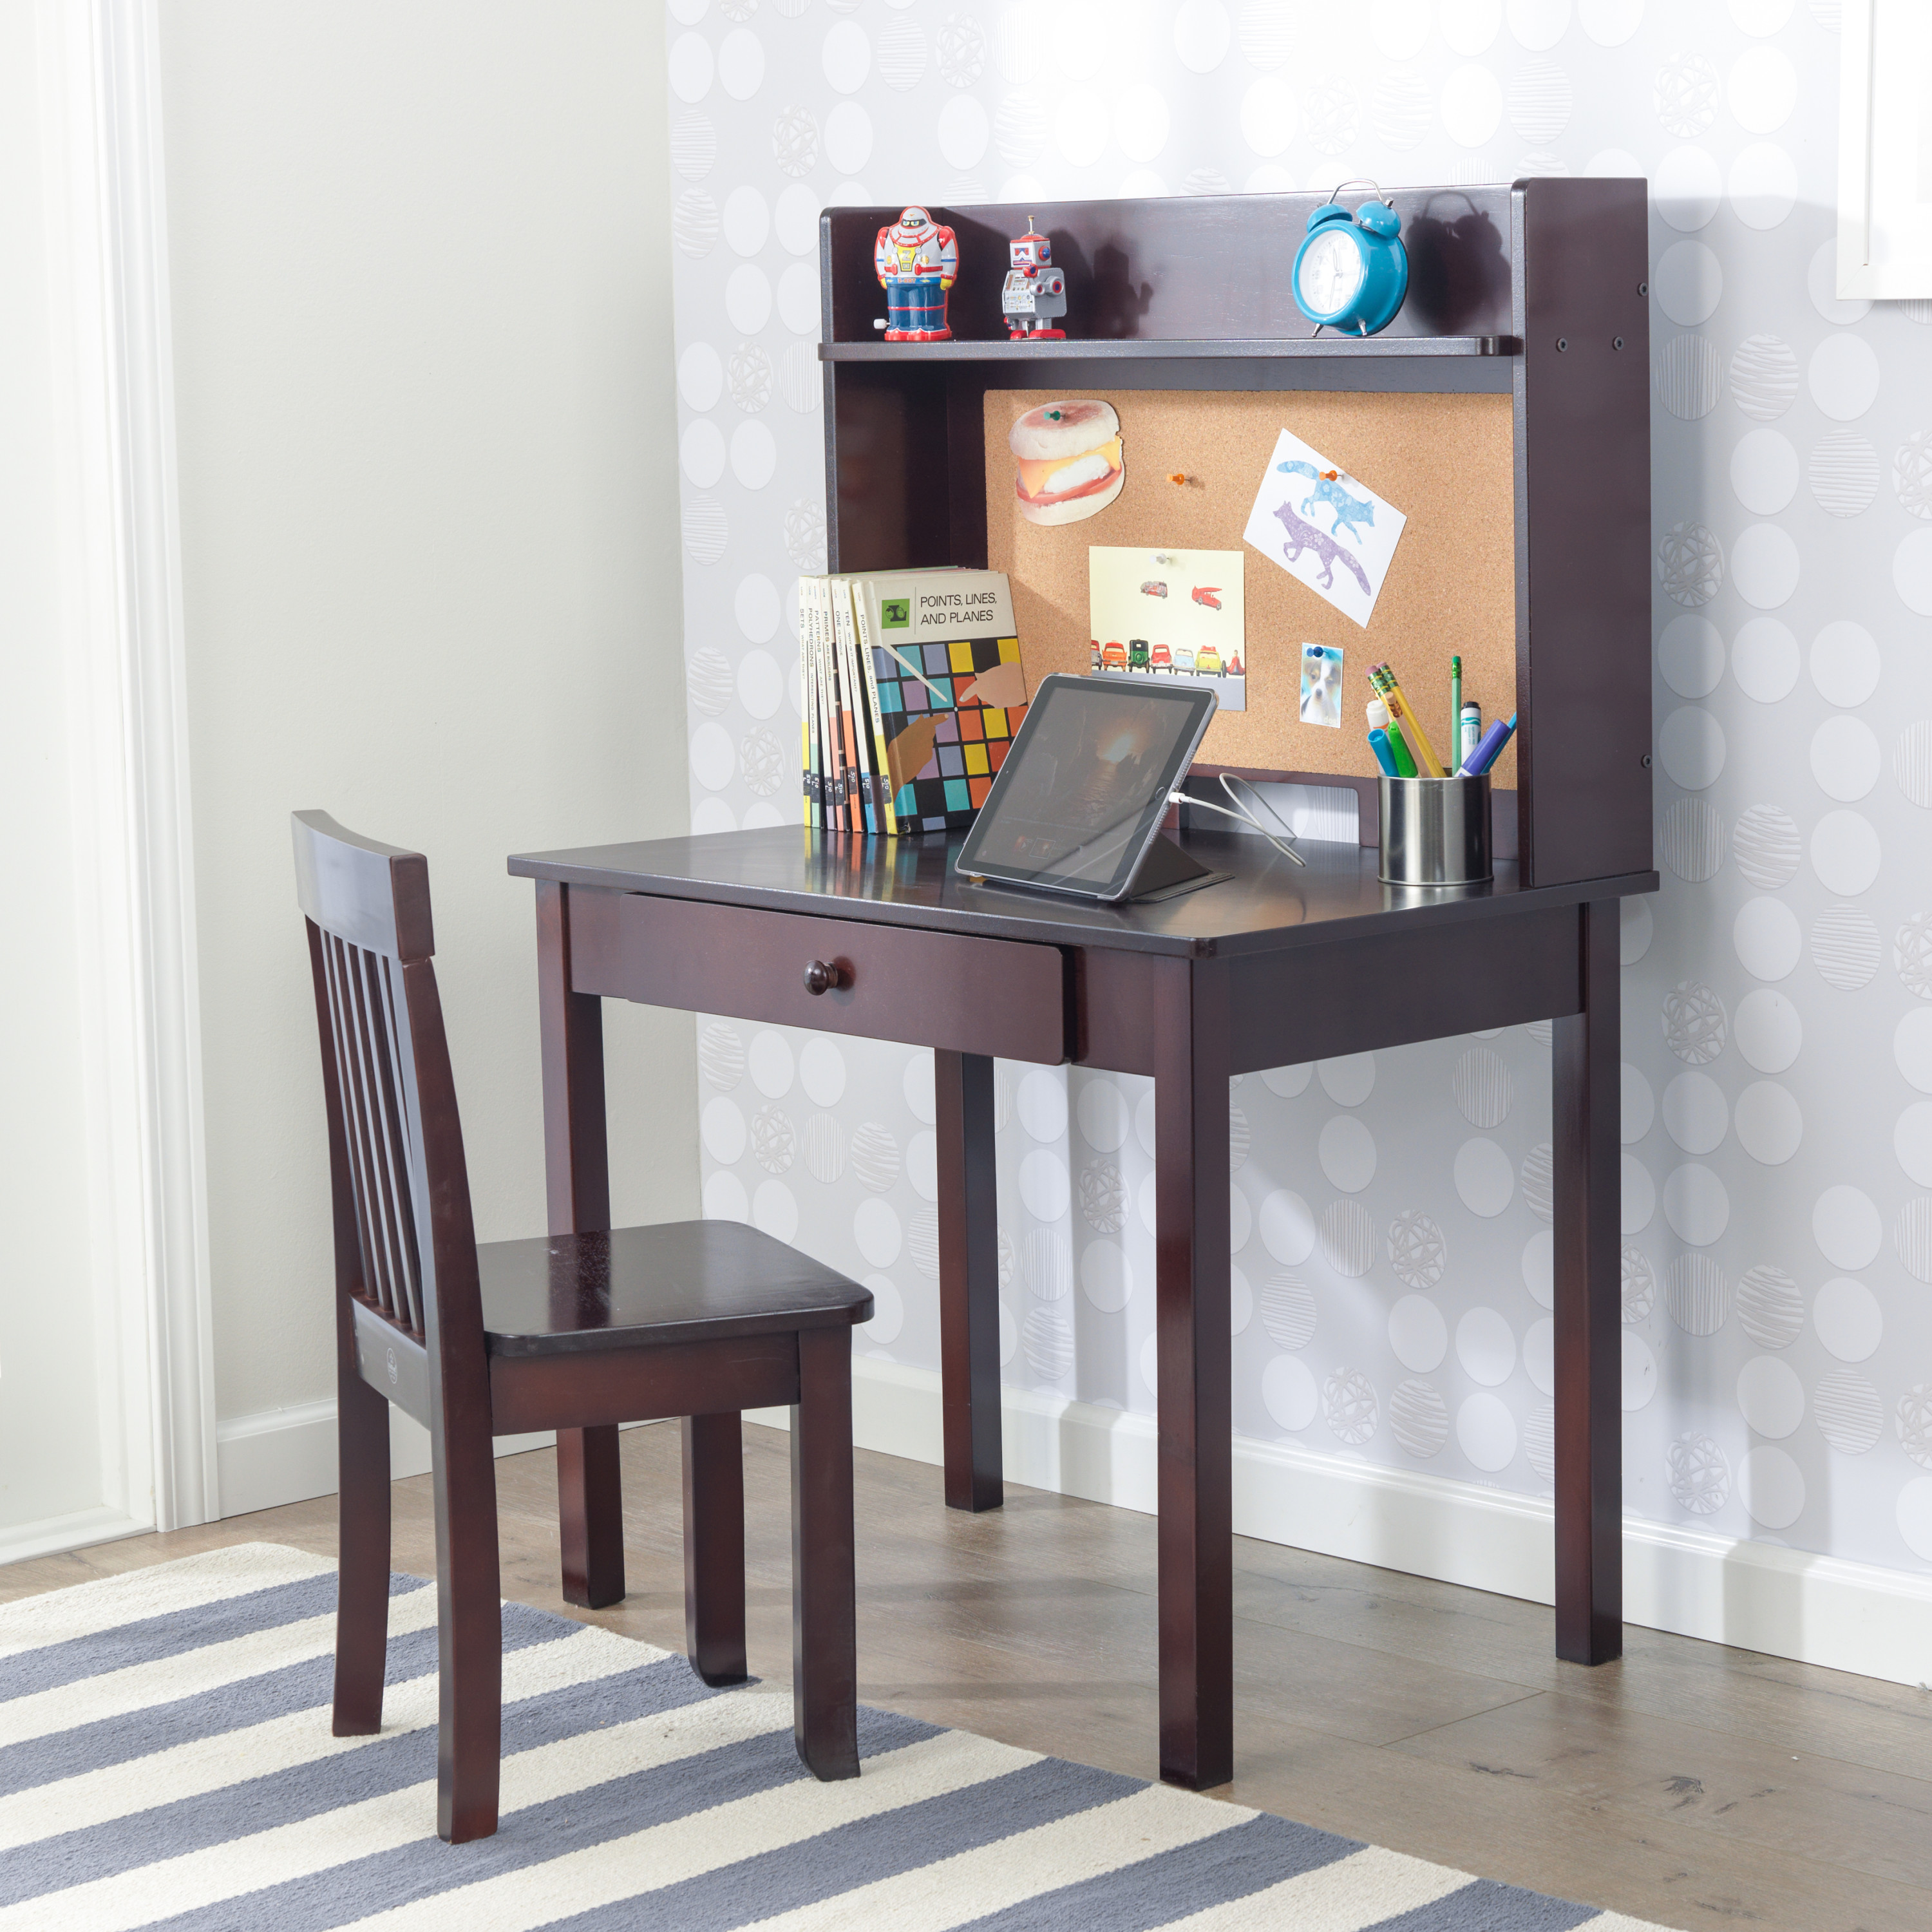 KidKraft Pinboard Wooden Desk with Drawer, Hutch, Shelf and Chair, Espresso - image 9 of 10